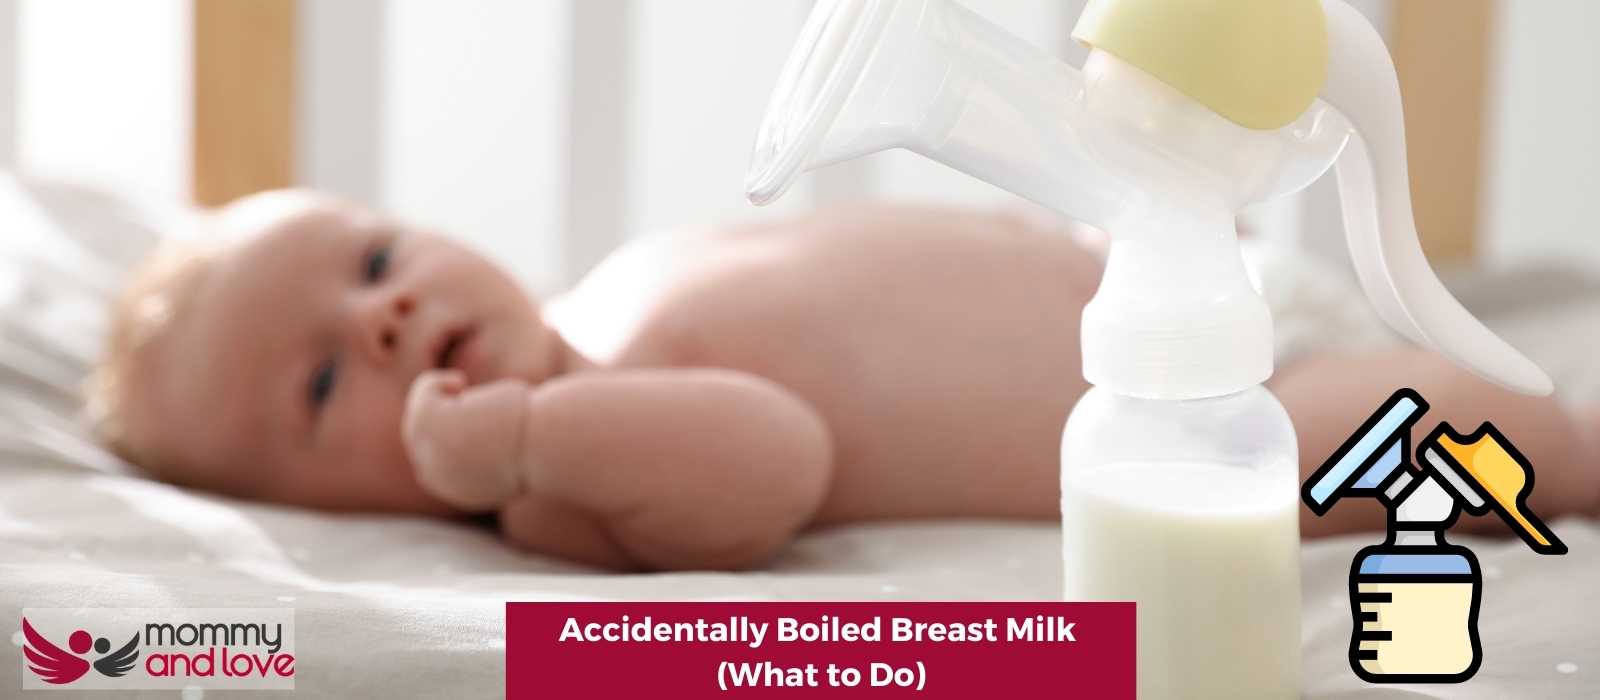 Accidentally Boiled Breast Milk (What to Do)